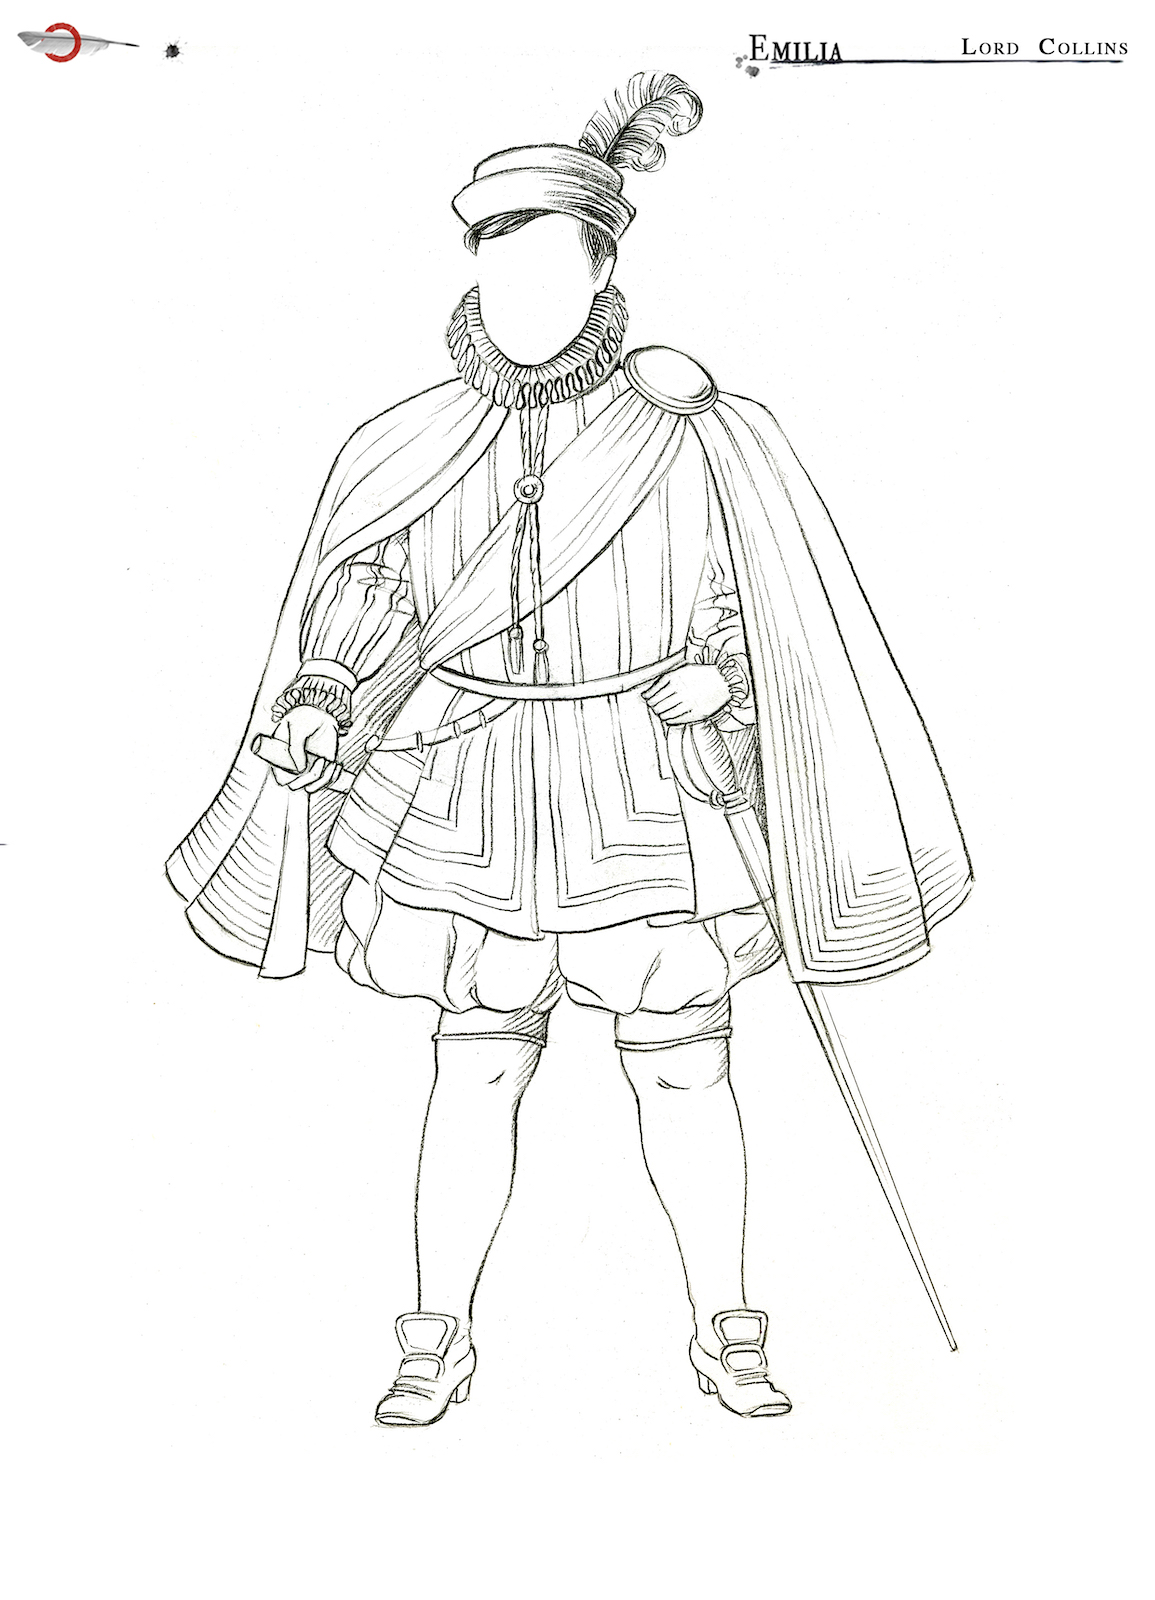 An outline of a costume sketch of a male Elizabethan costume